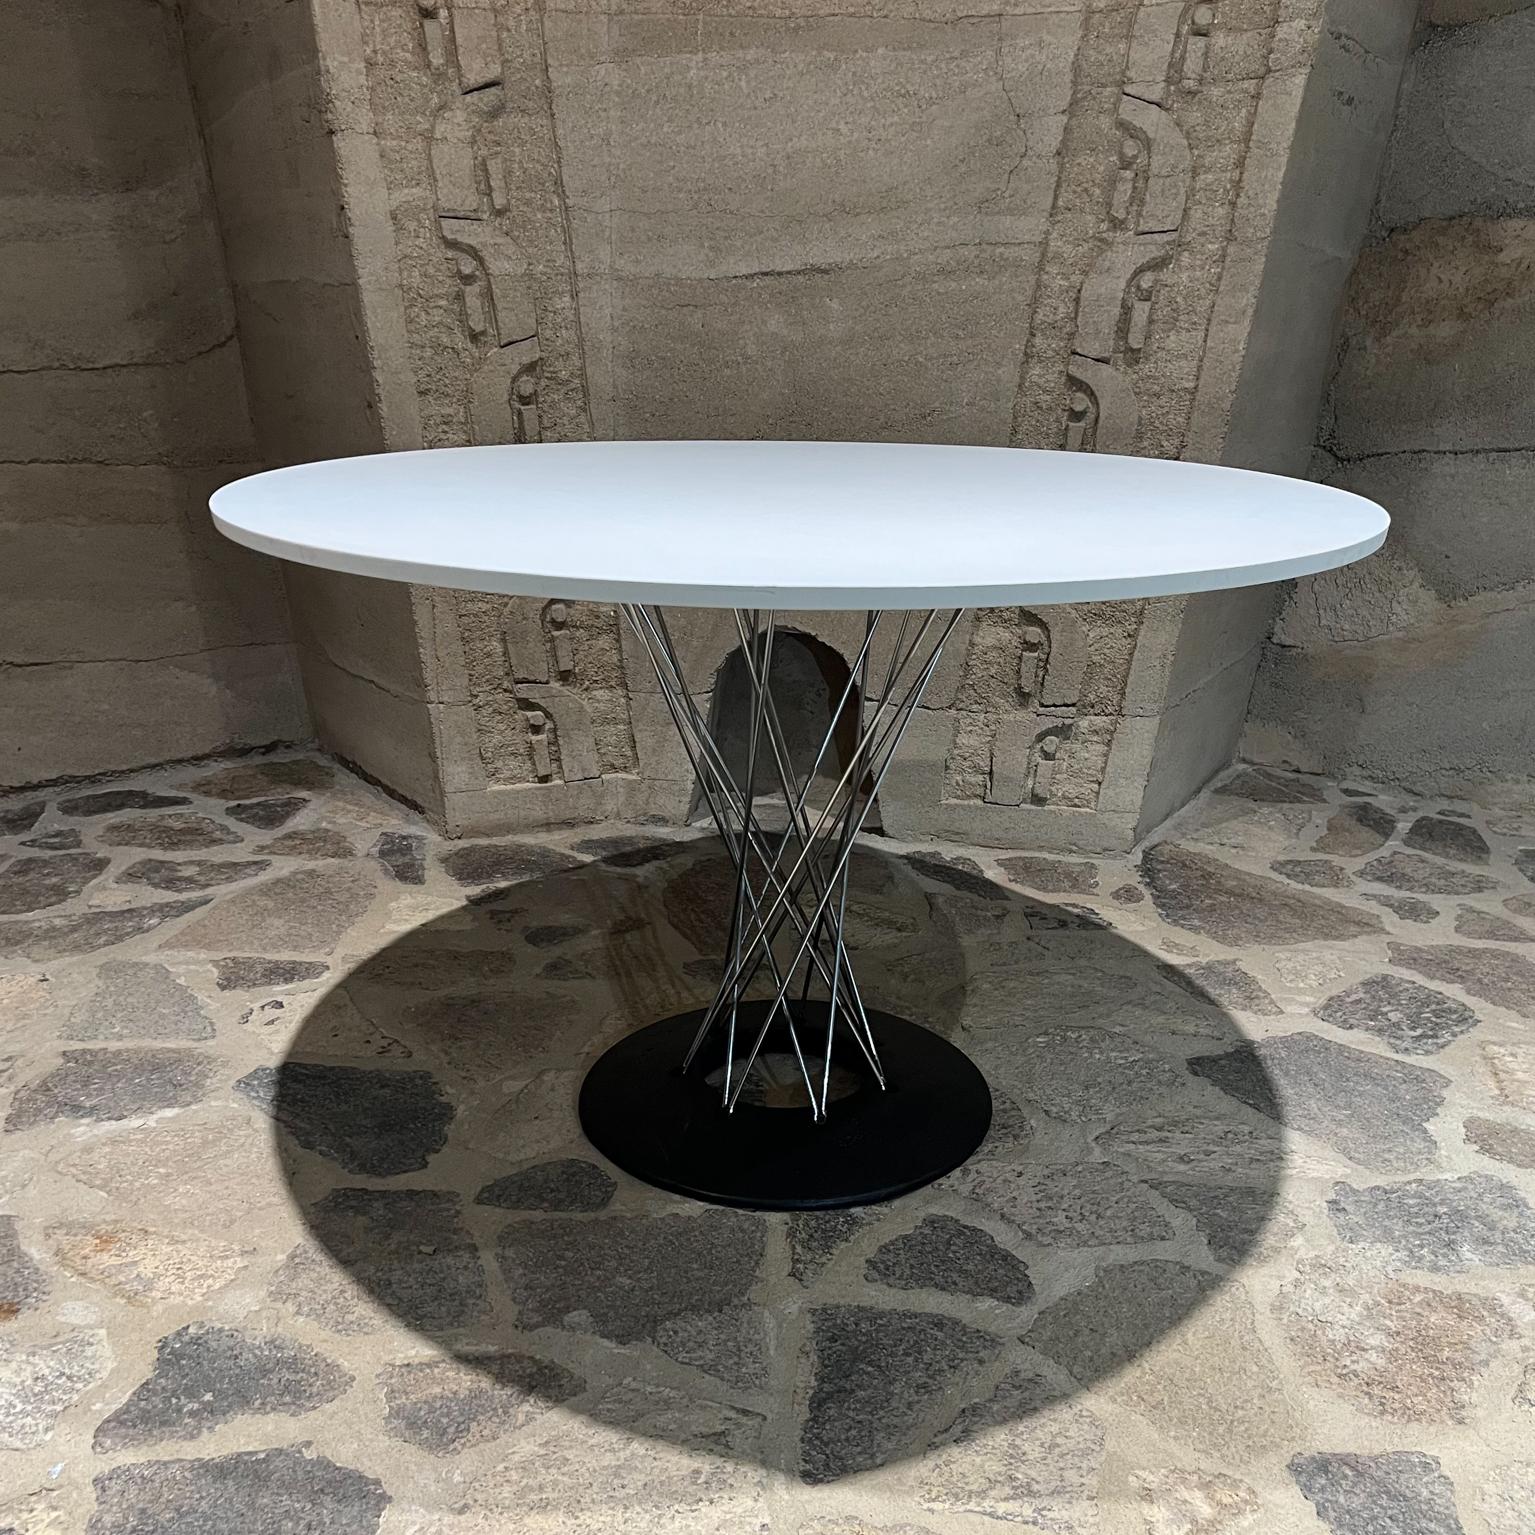 1957 Original Cyclone dining table designed by noted artist Isamu Noguchi for Knoll.
Signs of stamp ghost label underside present and worn.
Original tabletop features a new Formica top.
Made in the circa 1950s.
29.5 tall x 48 diameter
Preowned